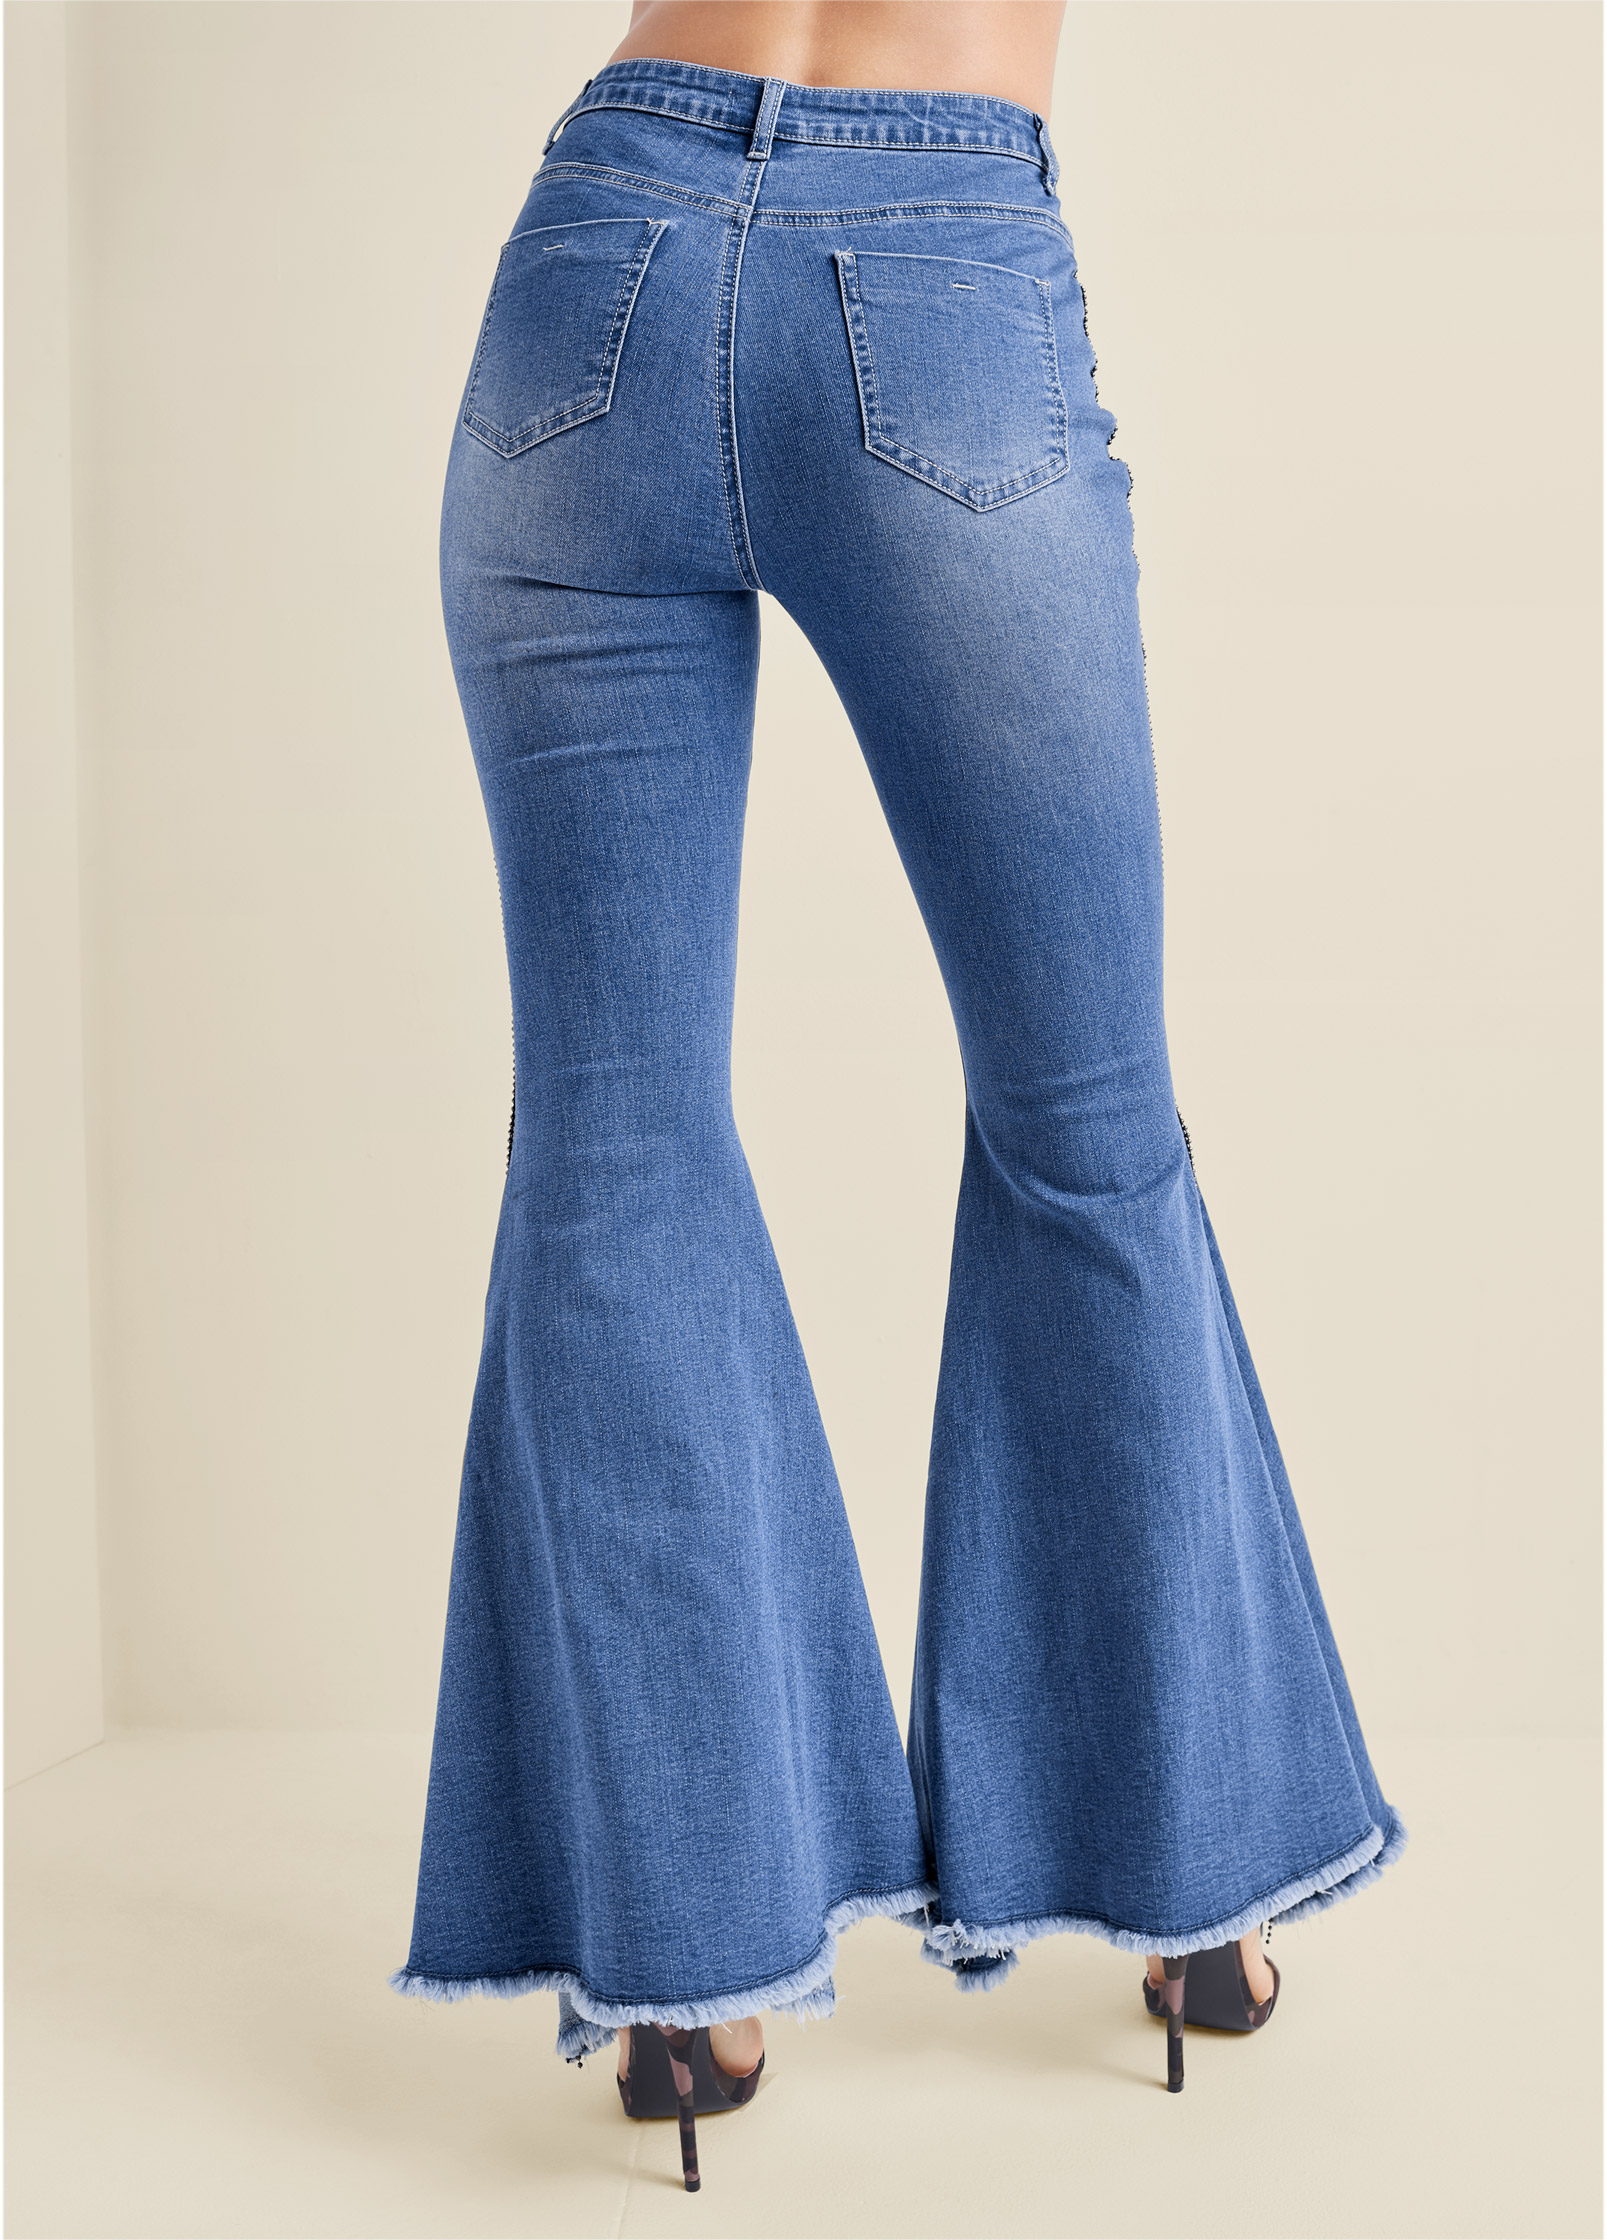 extreme flare jeans plus size